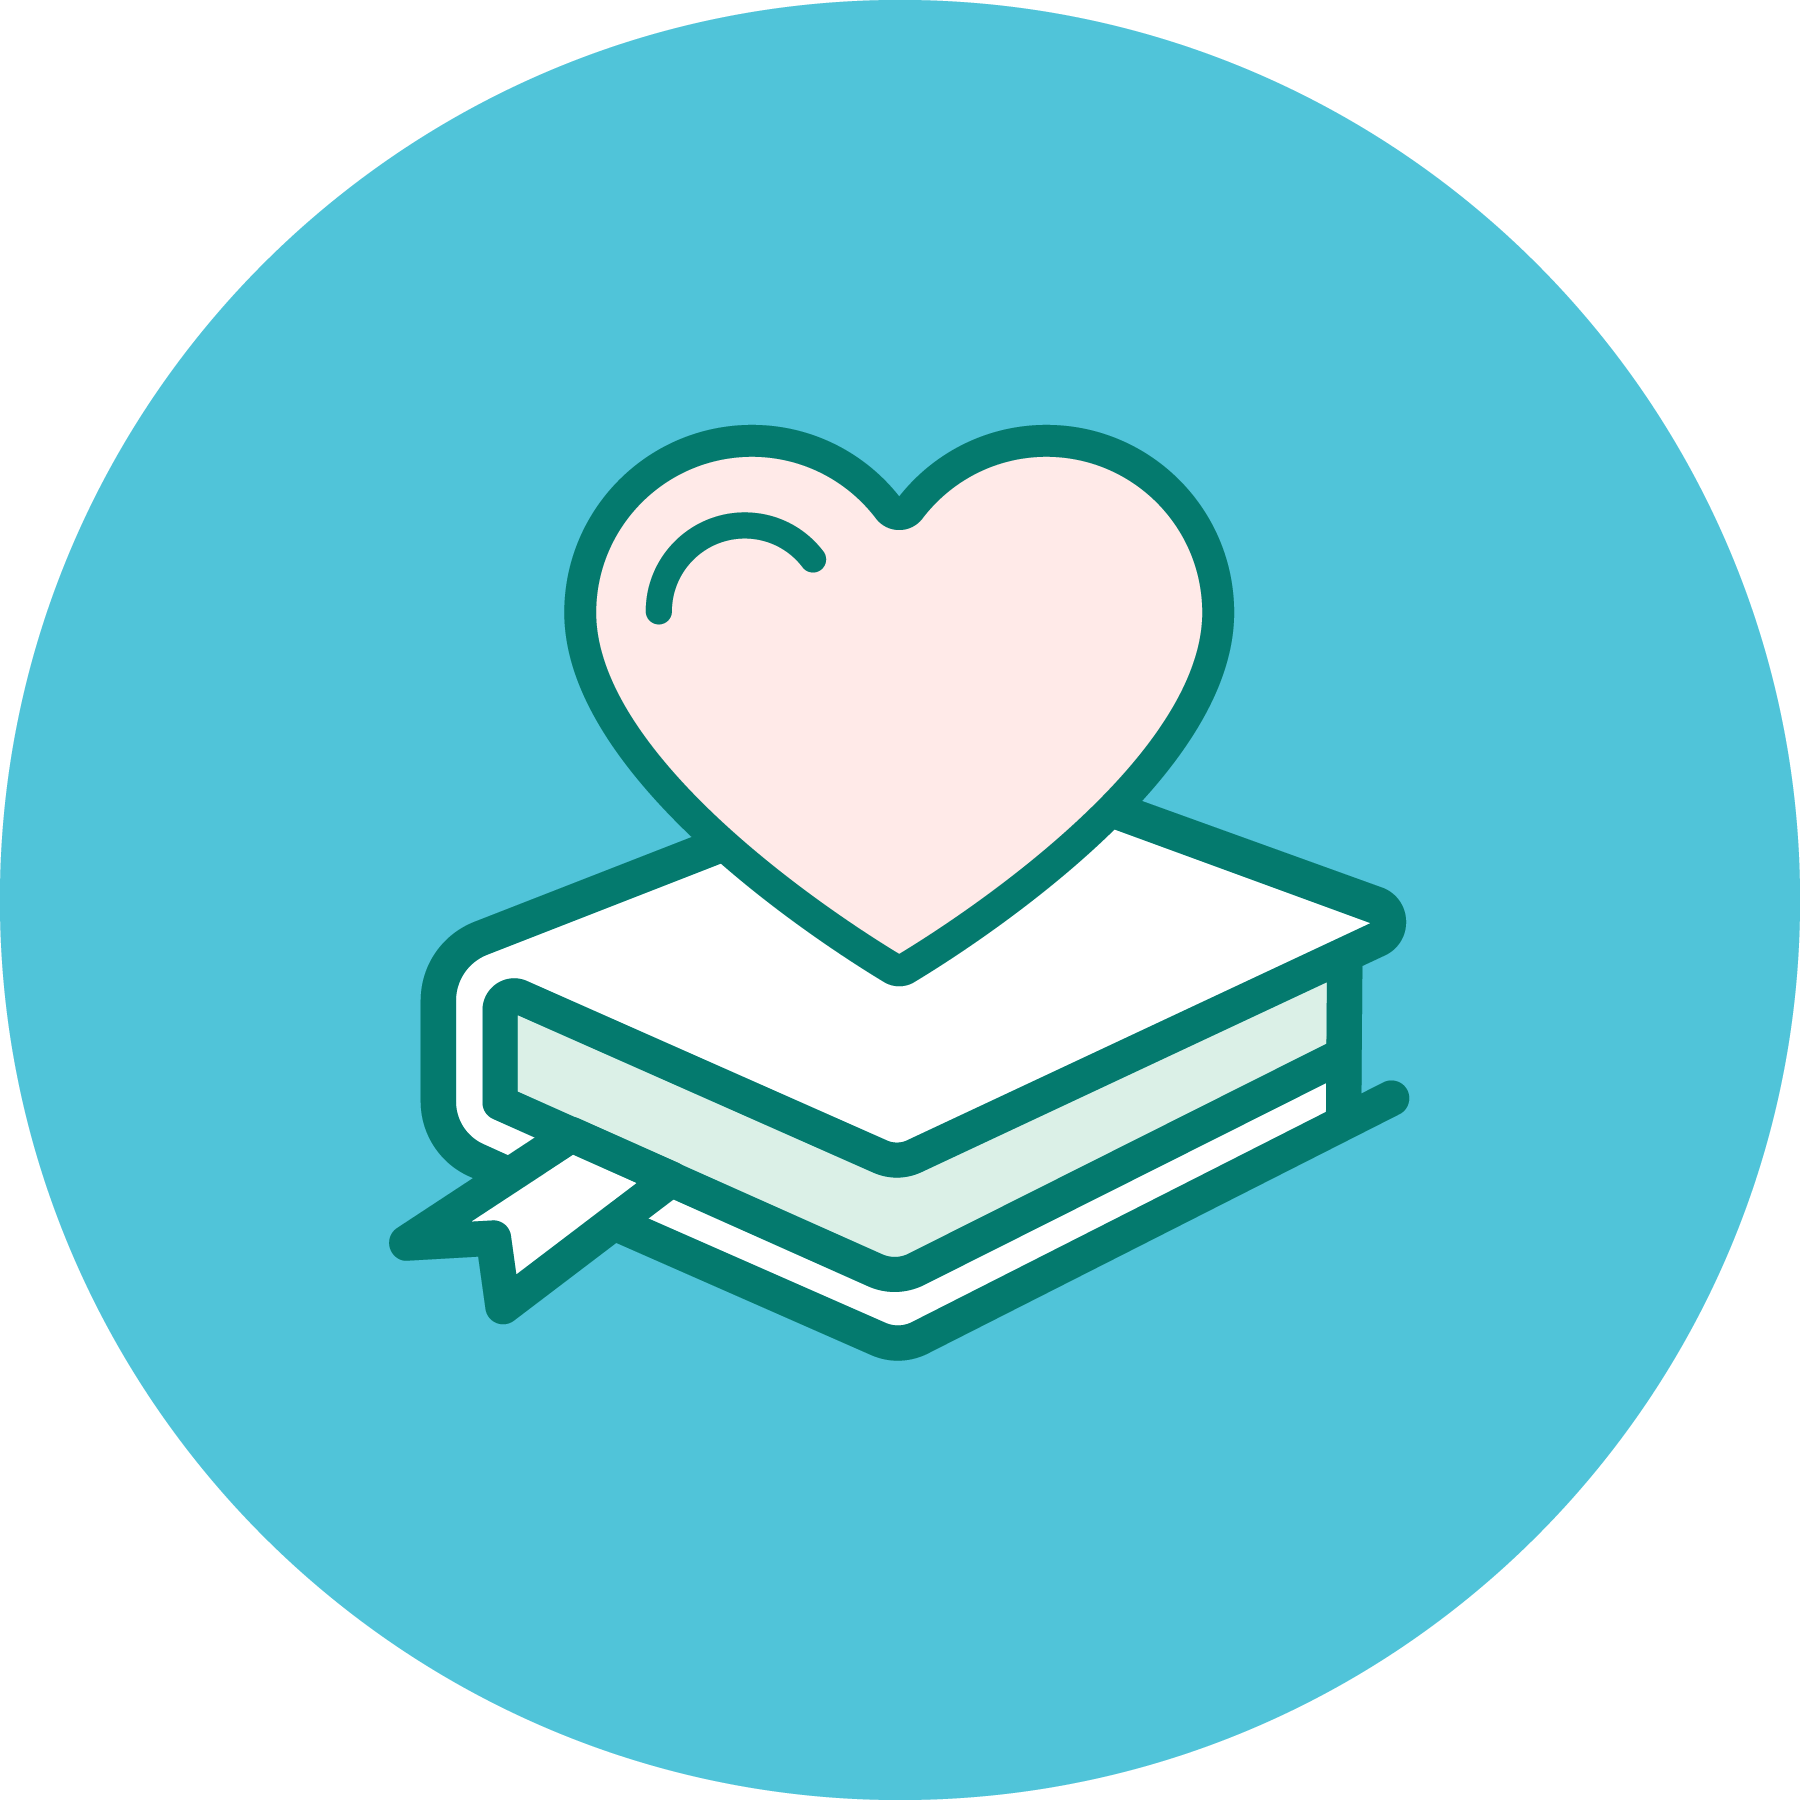 Heart on a book icon